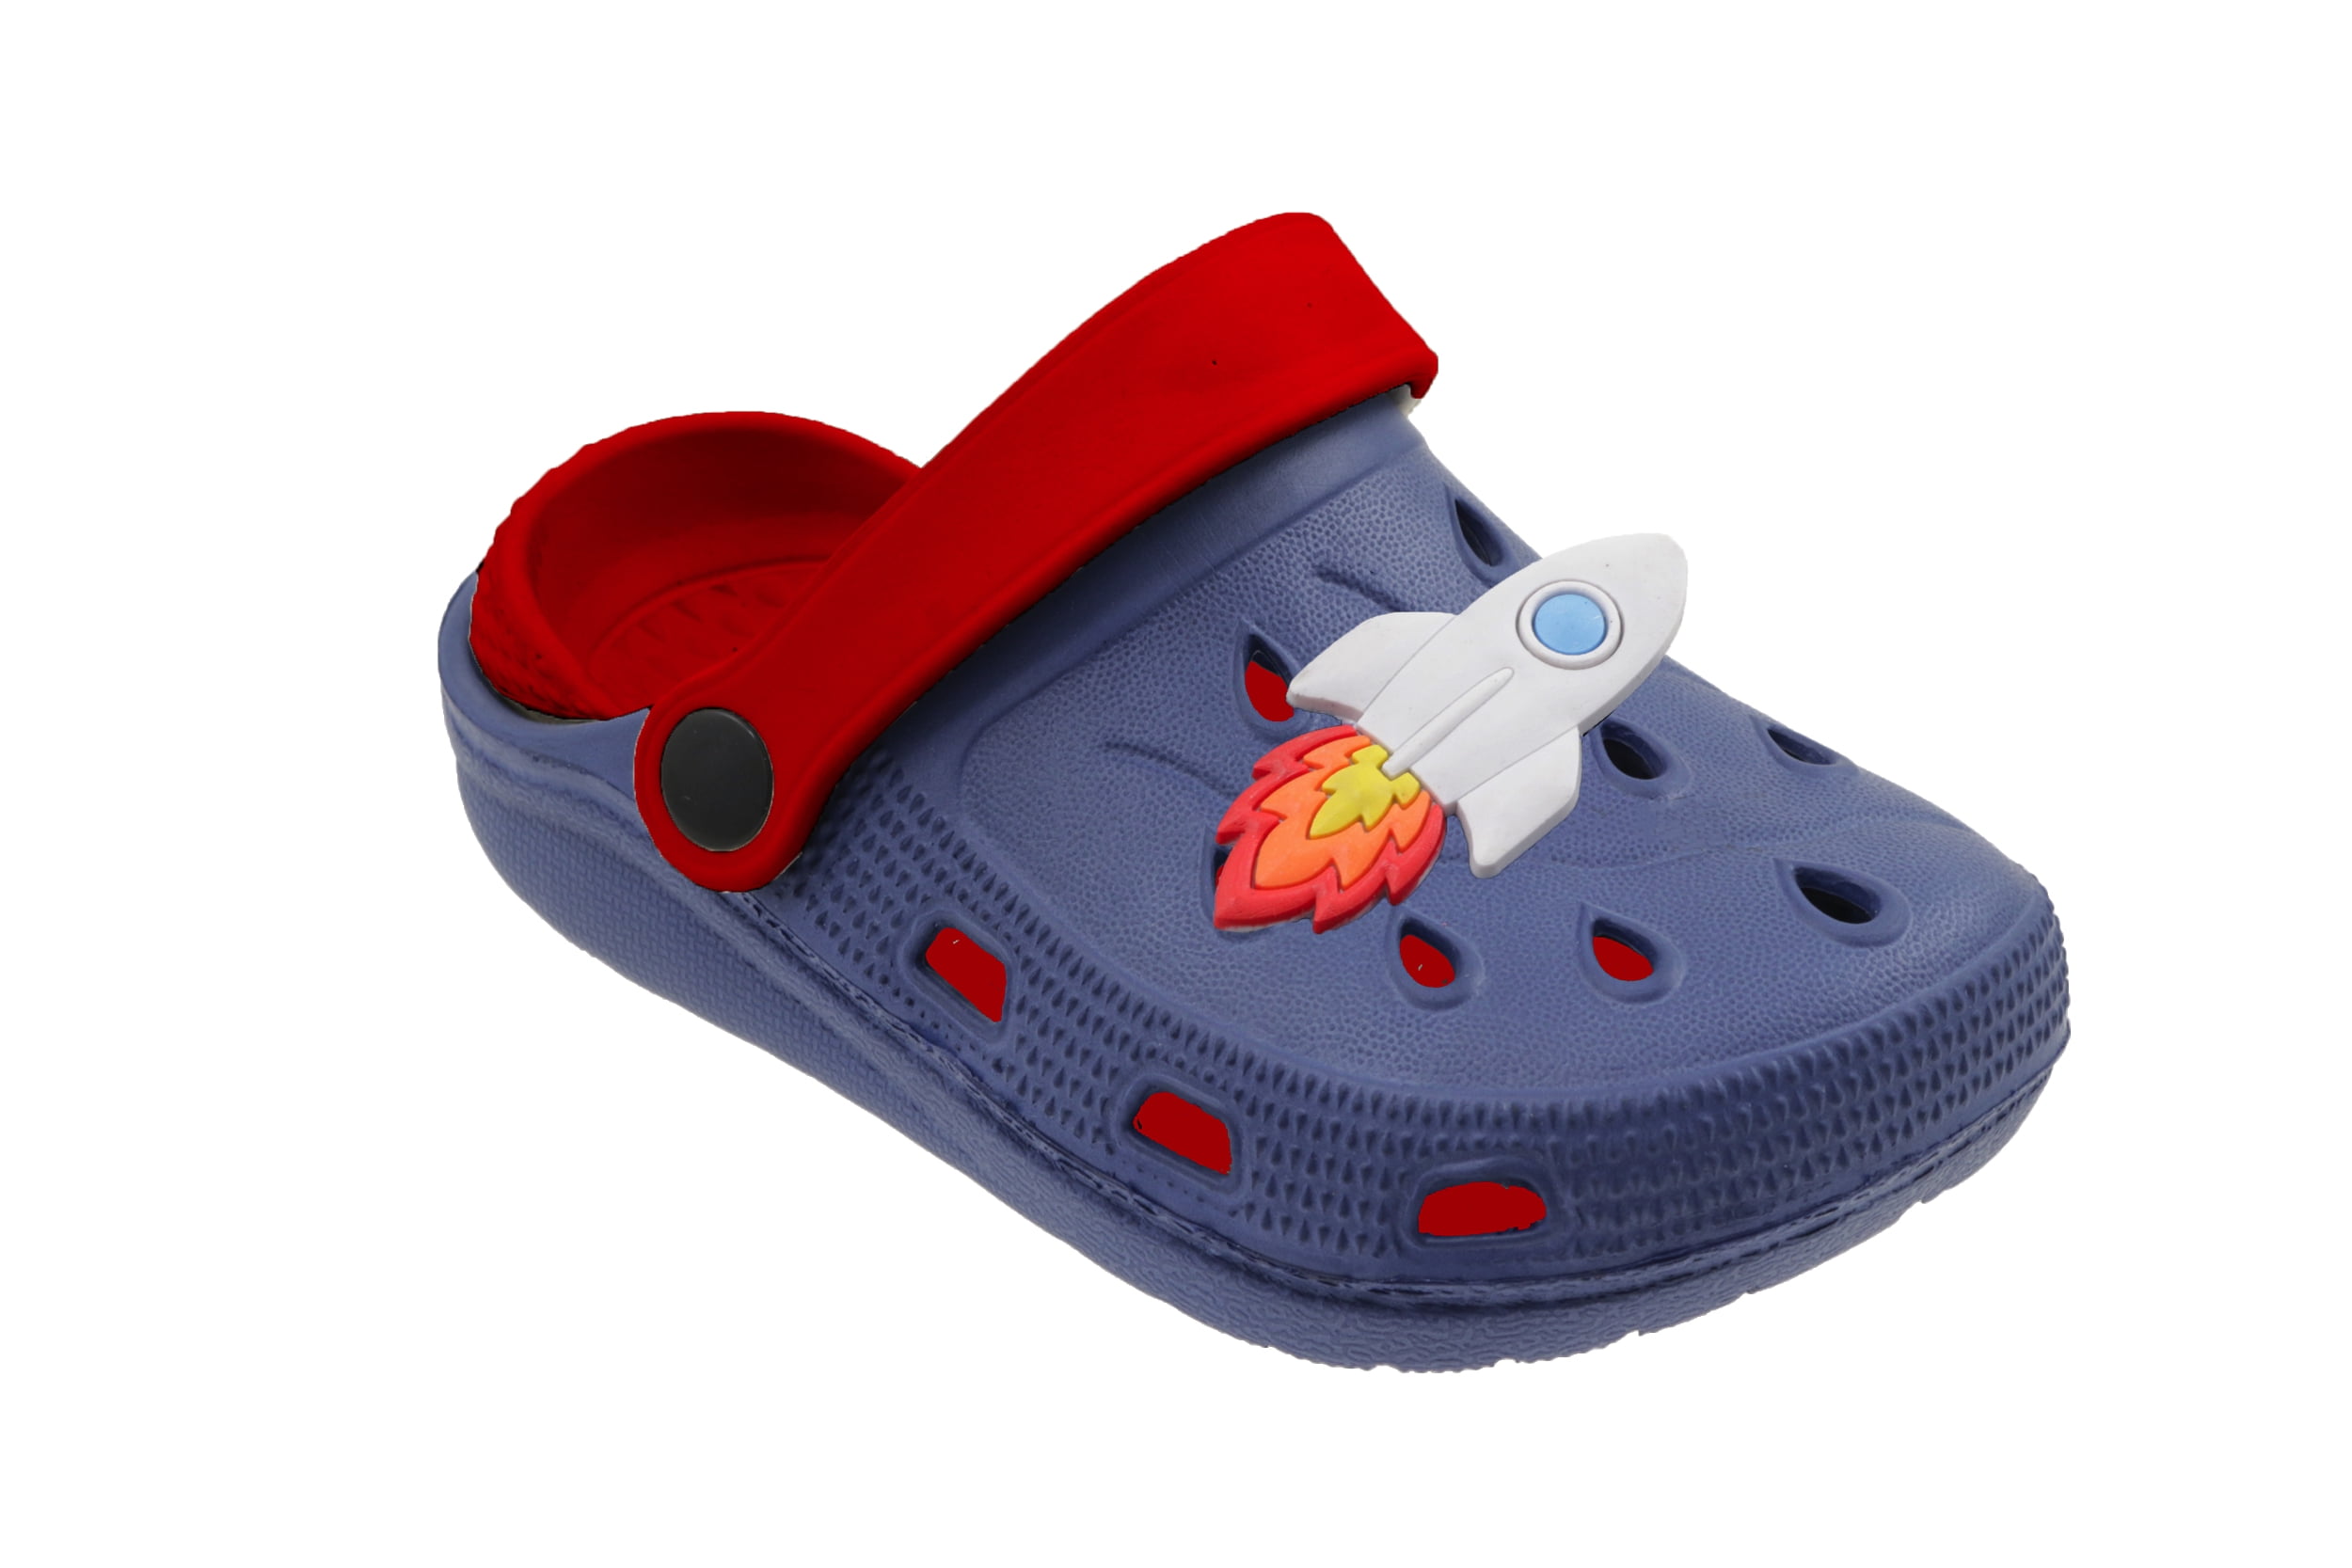 Boys Slippers in Red with Bear on Skiis Design ONLY £3.99!! 